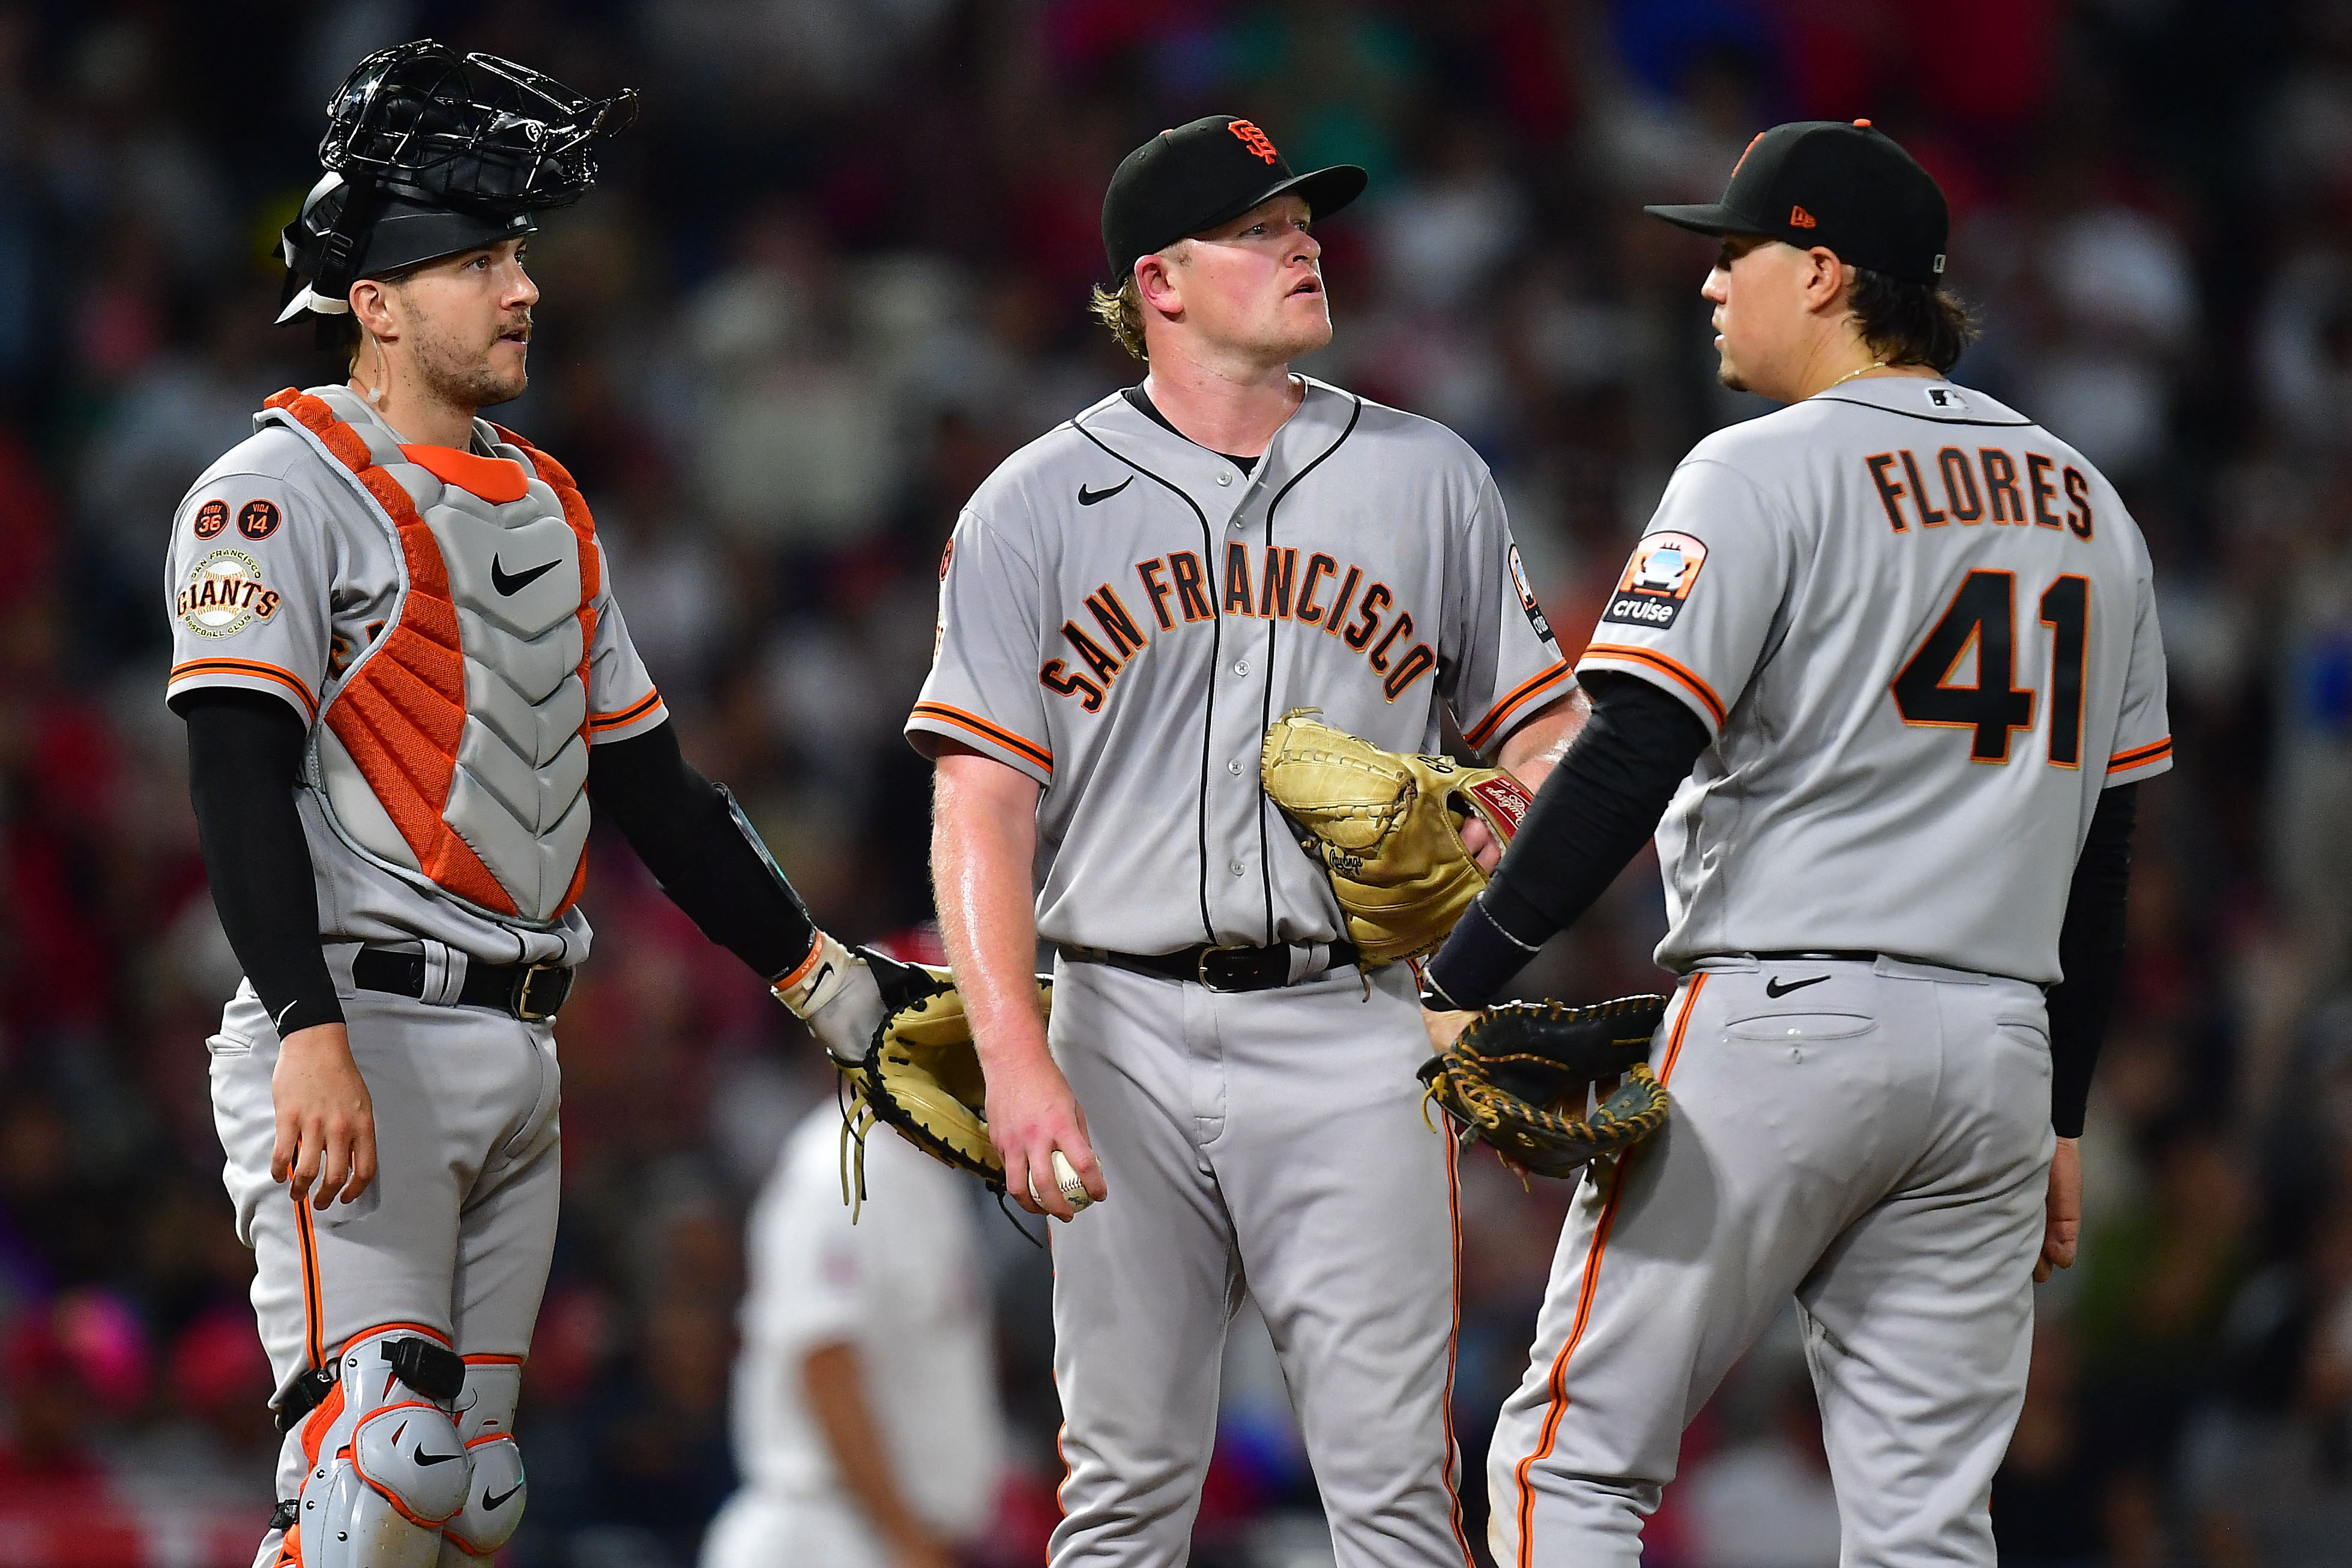 Giants score 6 runs in the 9th inning of an 8-3 win, sending the Angels to  their 7th straight loss - The San Diego Union-Tribune